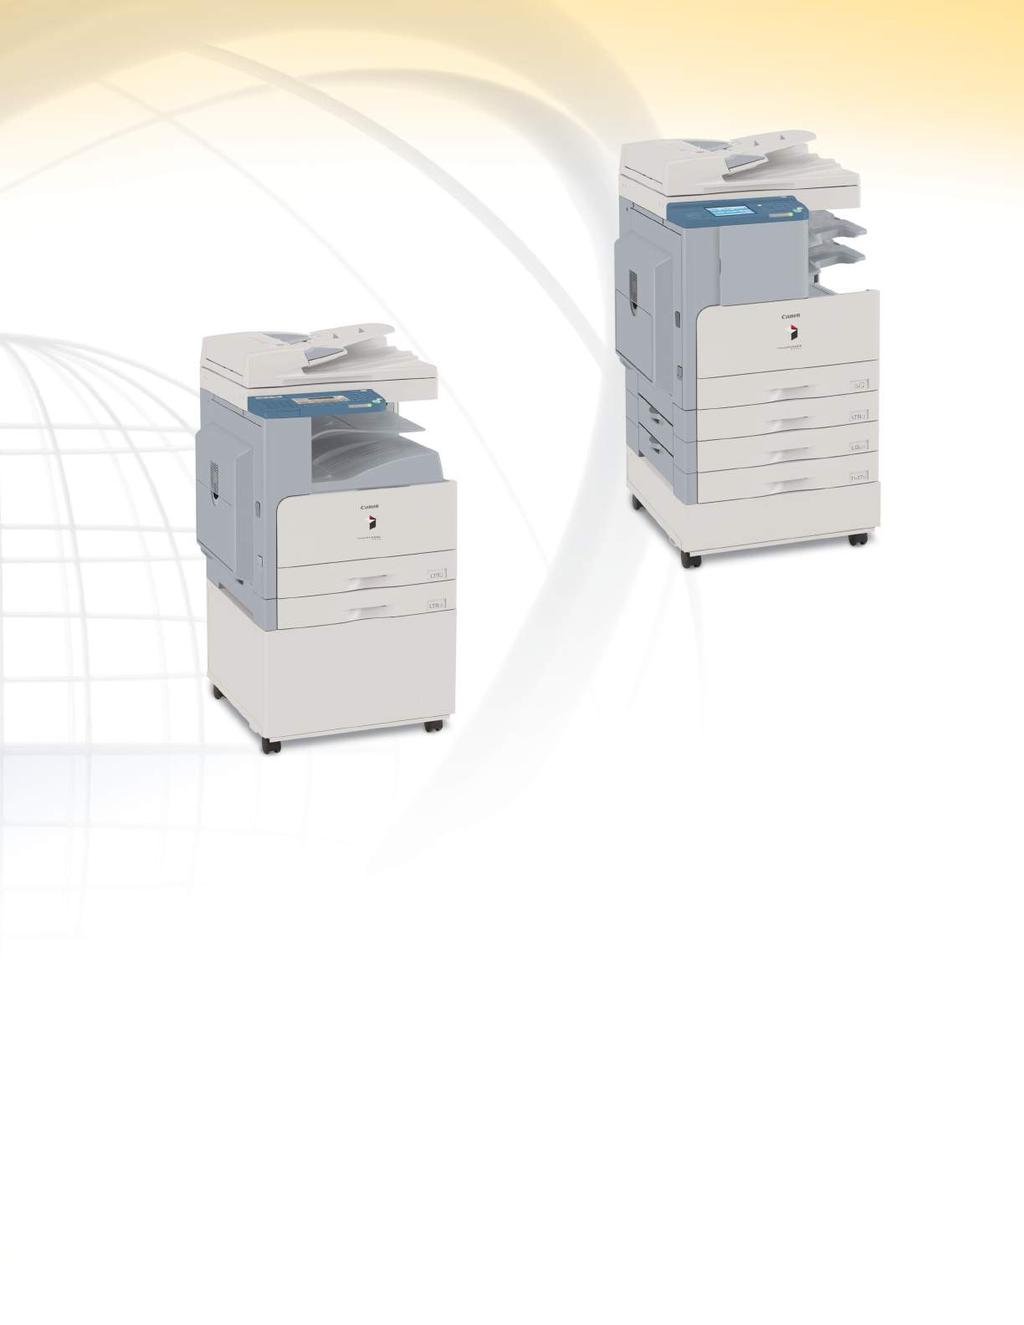 imagerunner 2020/2016 The imagerunner 2020/2016 base models deliver digital copying, network printing, and optional faxing to meet the needs